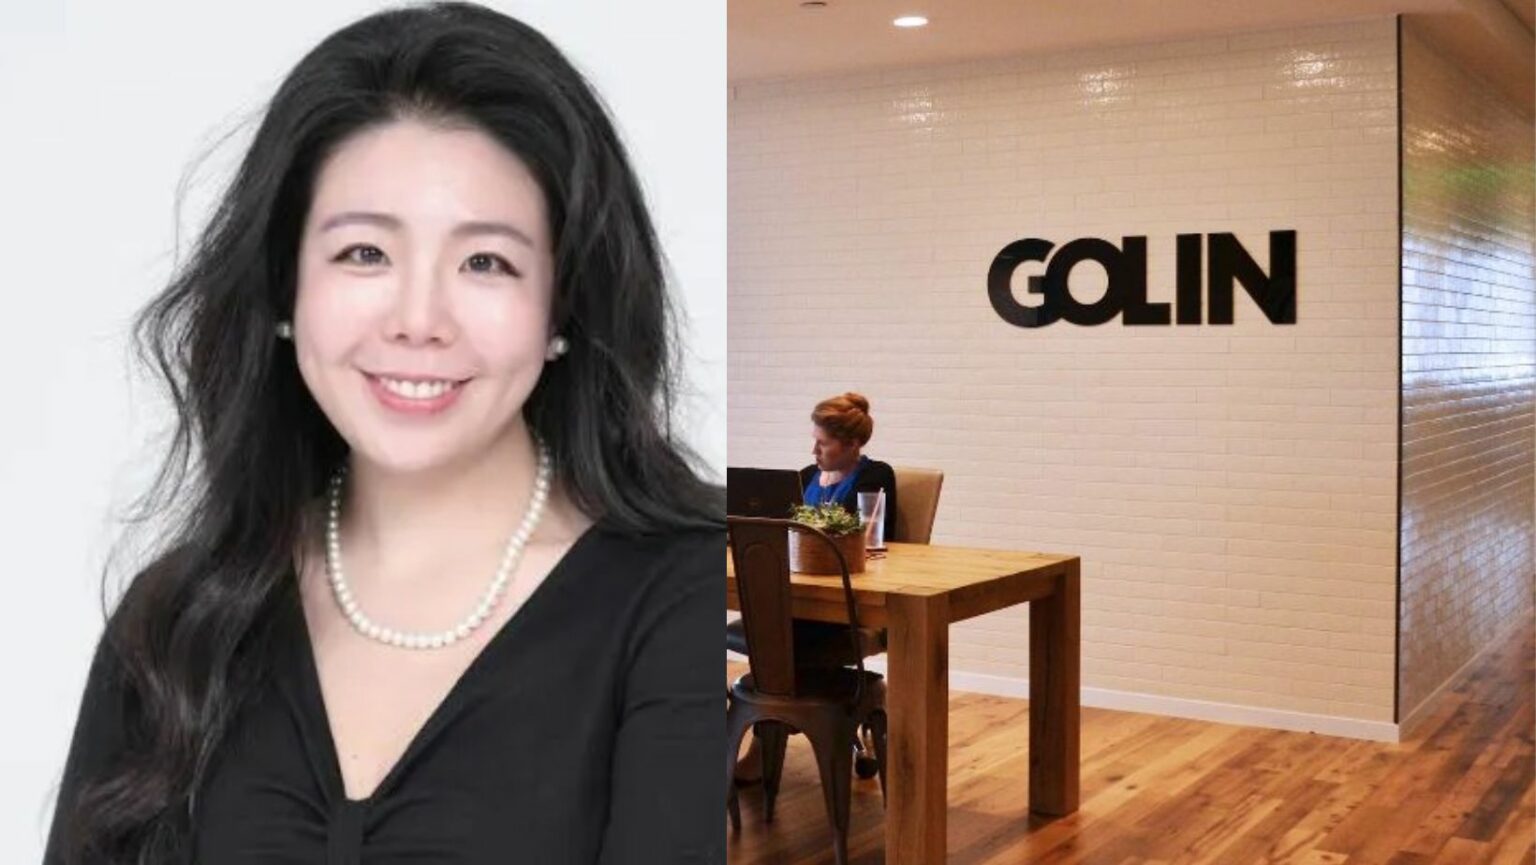 Neysa Chou Takes the Reins as New Executive Director of Golin